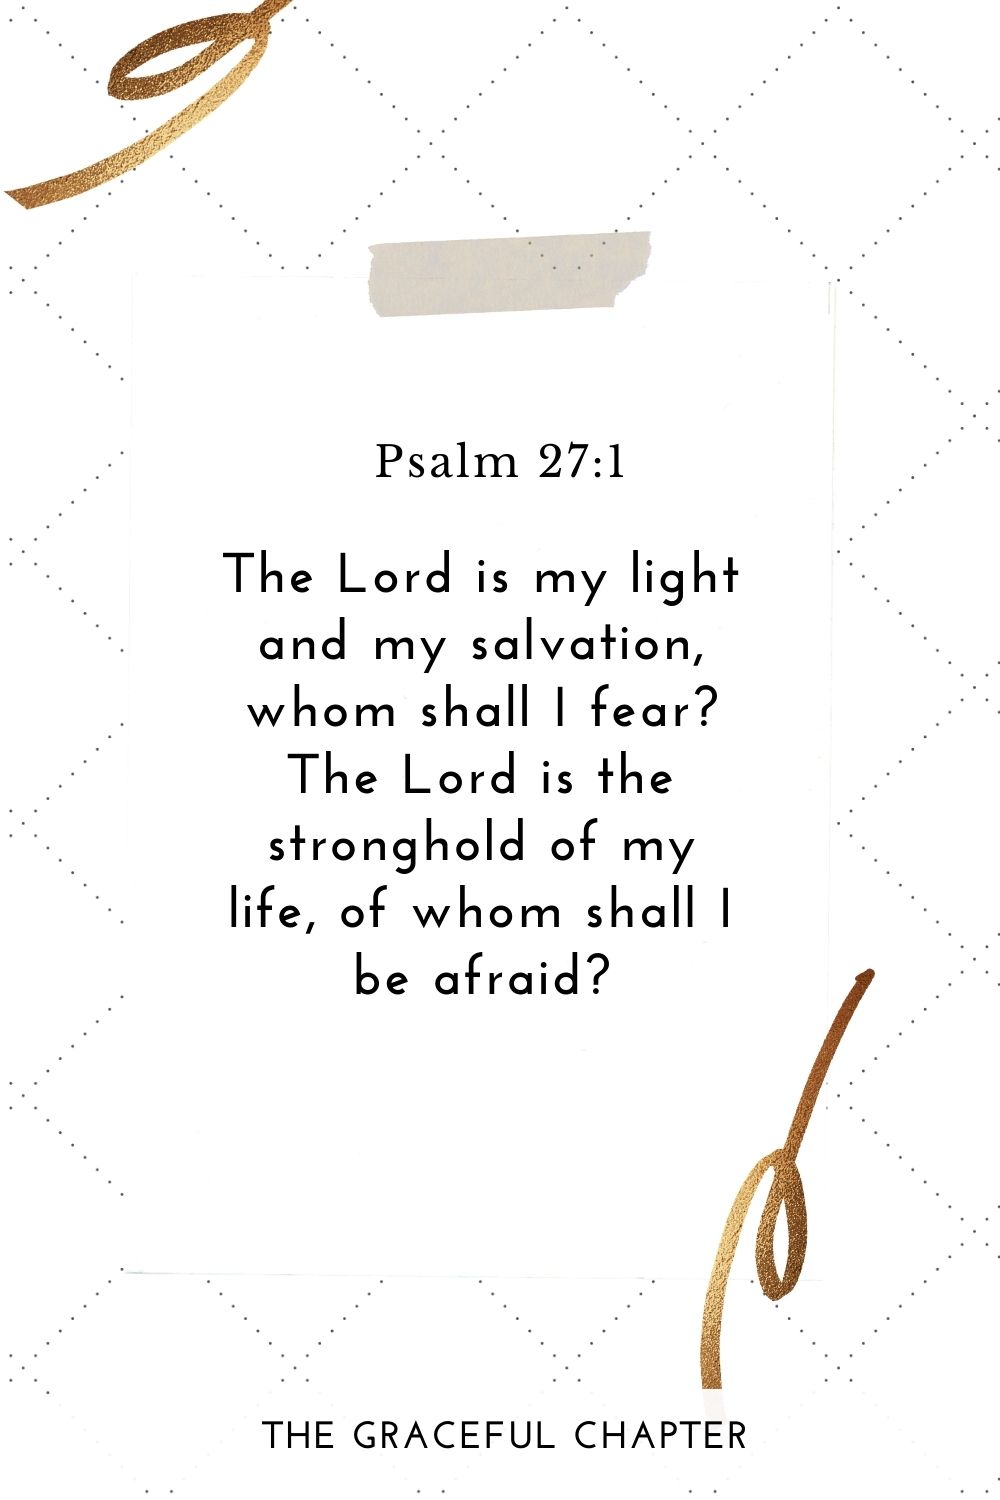 The Lord is my light and my salvation, whom shall I fear? The Lord is the stronghold of my life, of whom shall I be afraid? Psalm 27:1